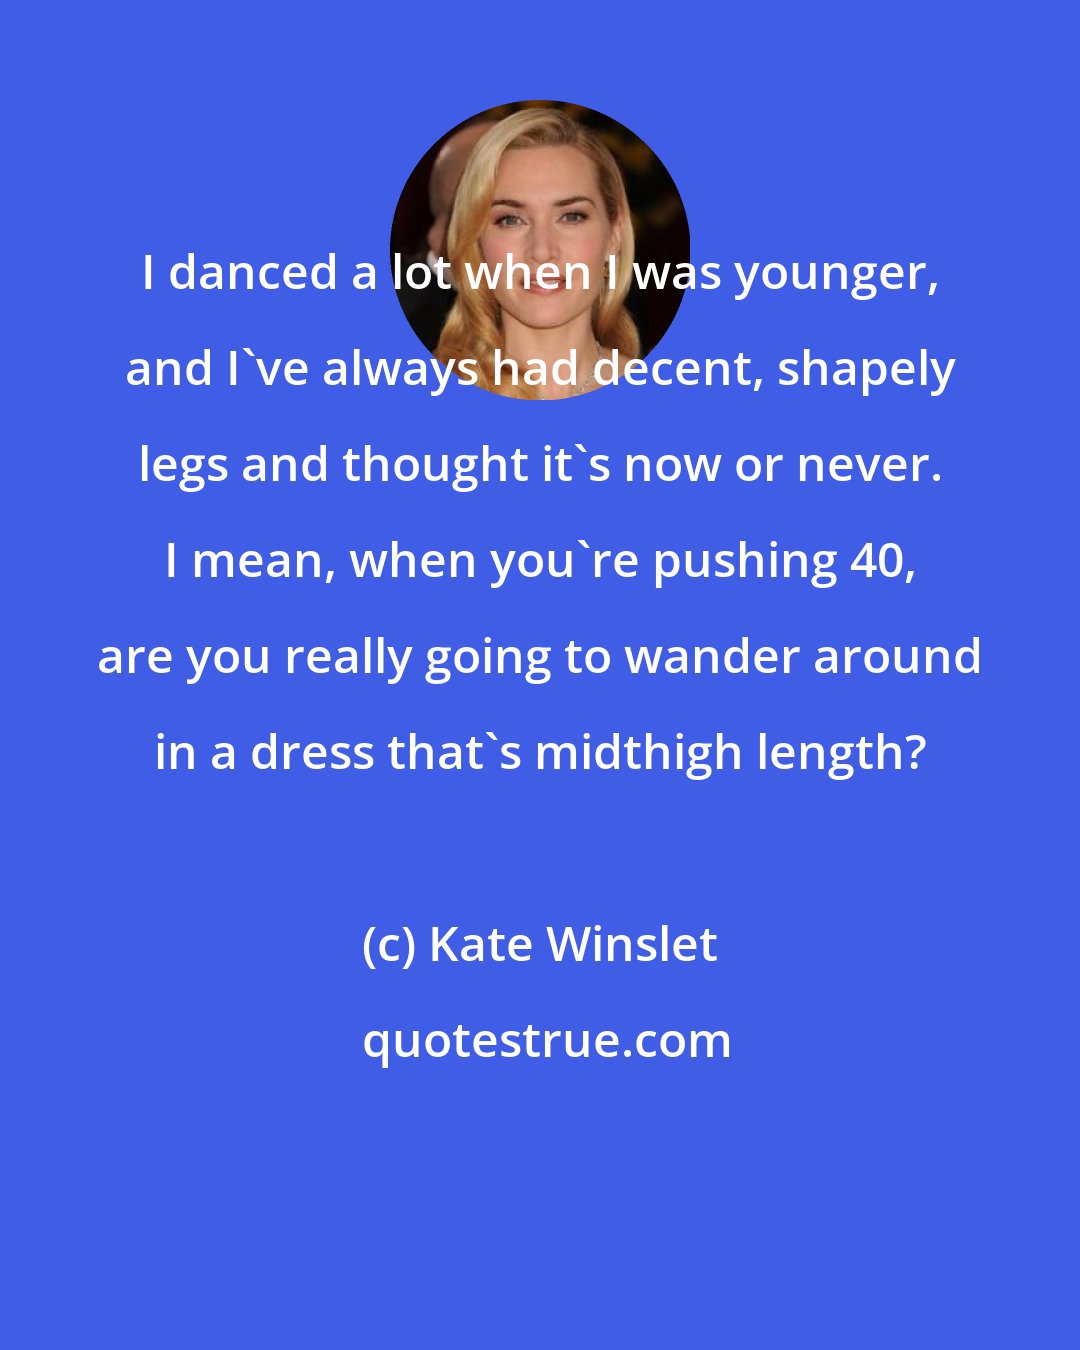 Kate Winslet: I danced a lot when I was younger, and I've always had decent, shapely legs and thought it's now or never. I mean, when you're pushing 40, are you really going to wander around in a dress that's midthigh length?